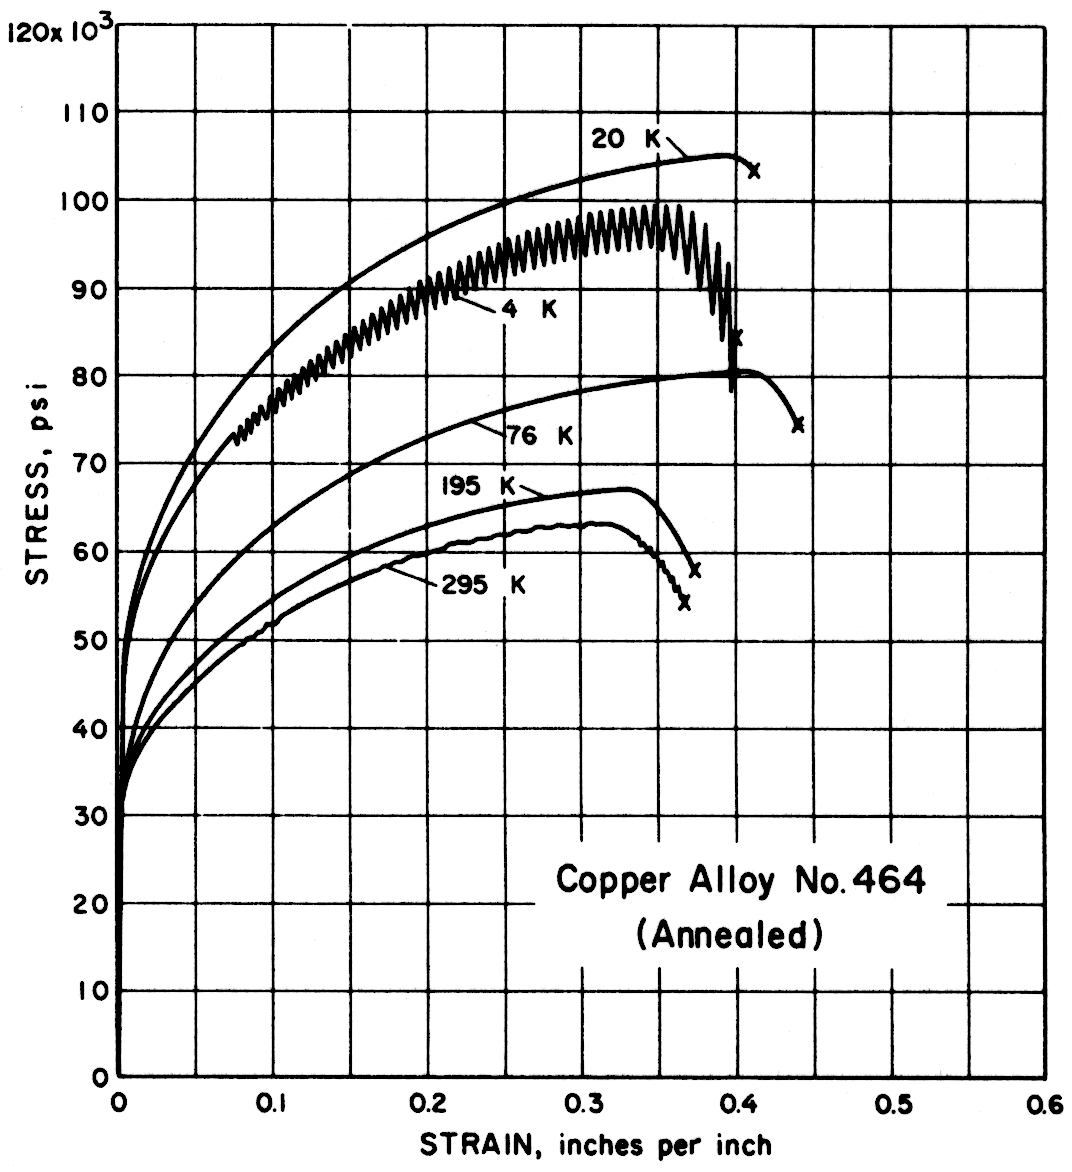 Copper Alloy No. 464 (Annealed)